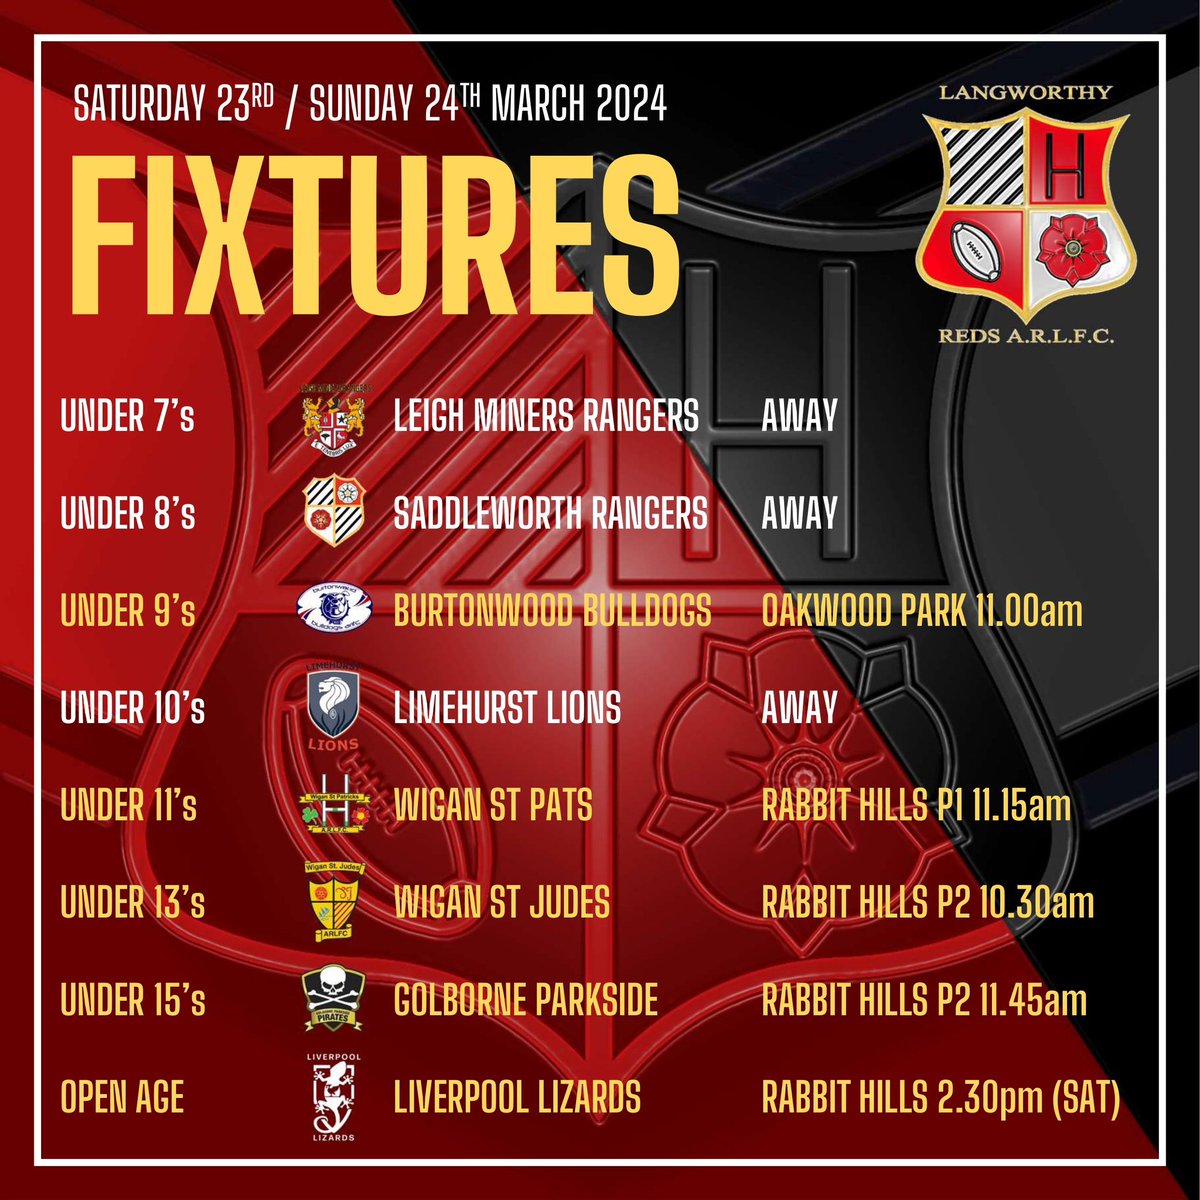 After a positive start to the season last weekend, it’s a full house of fixtures again this week as all teams take to the field. If you can, get down to a game and show your support #rugbyleague